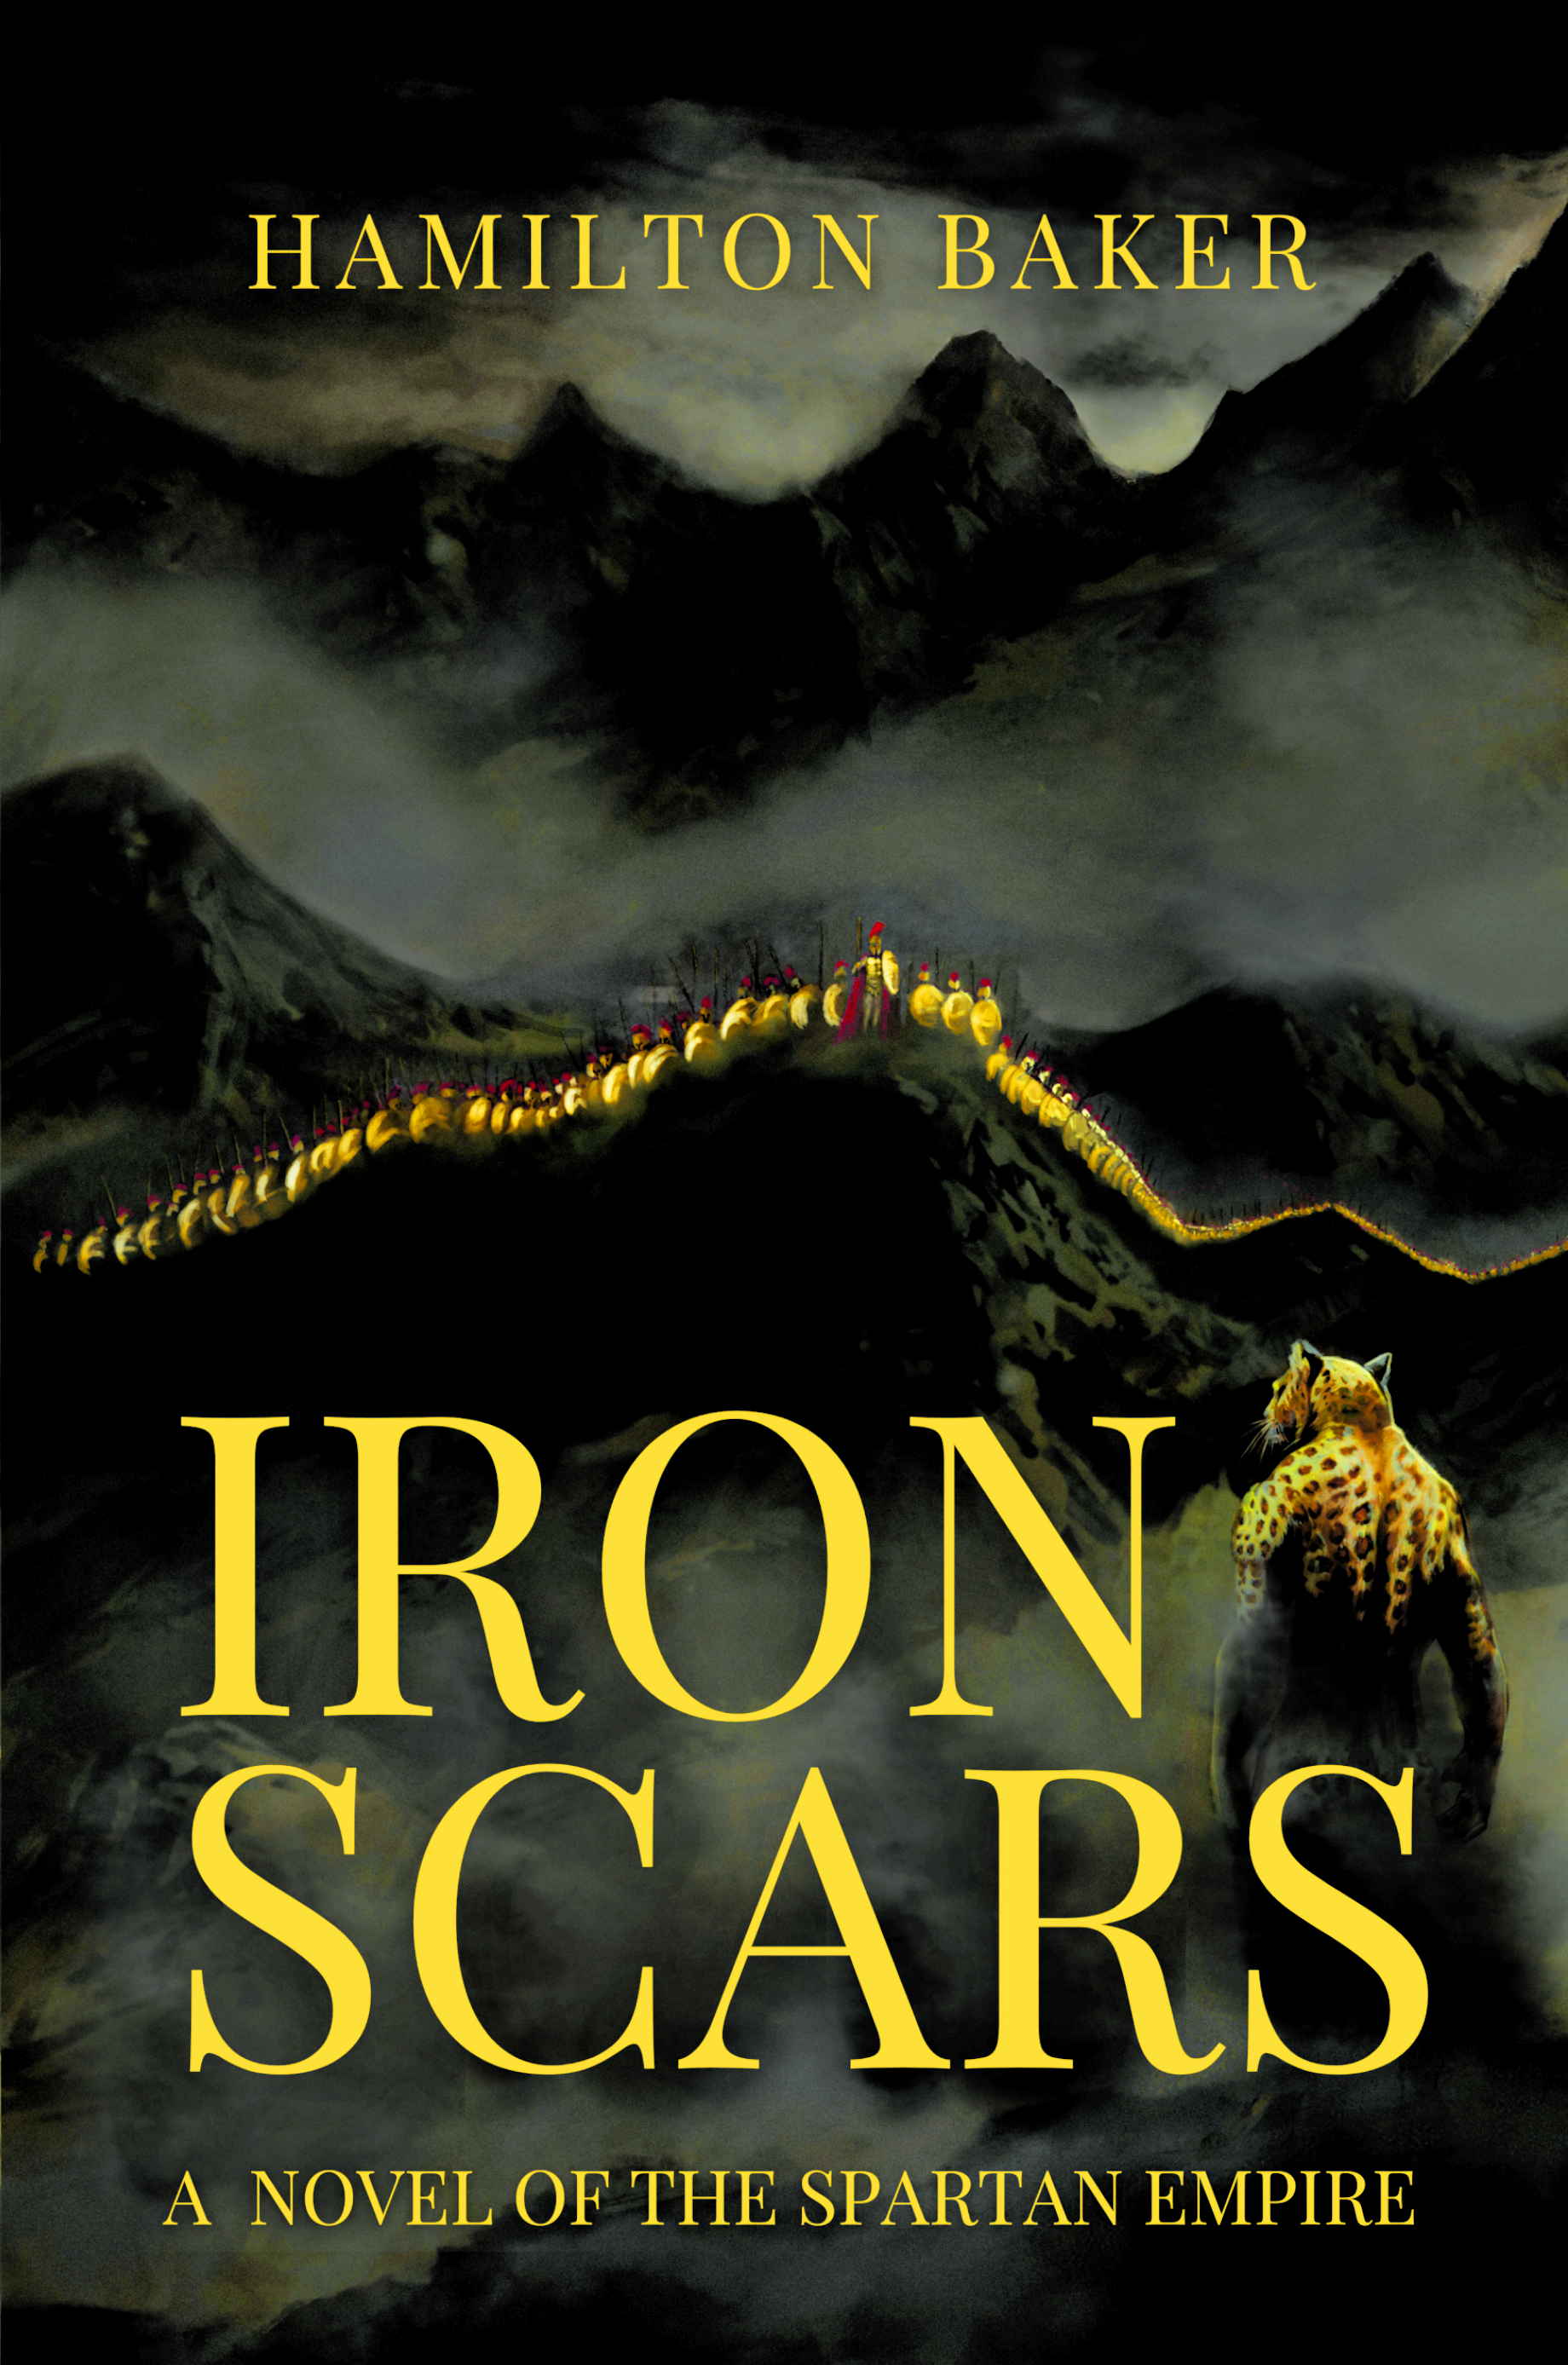 Cover of Iron Scars by Hamilton Baker, features a Spartan army lined up on a mountain facing down a singular jaguar warrior character